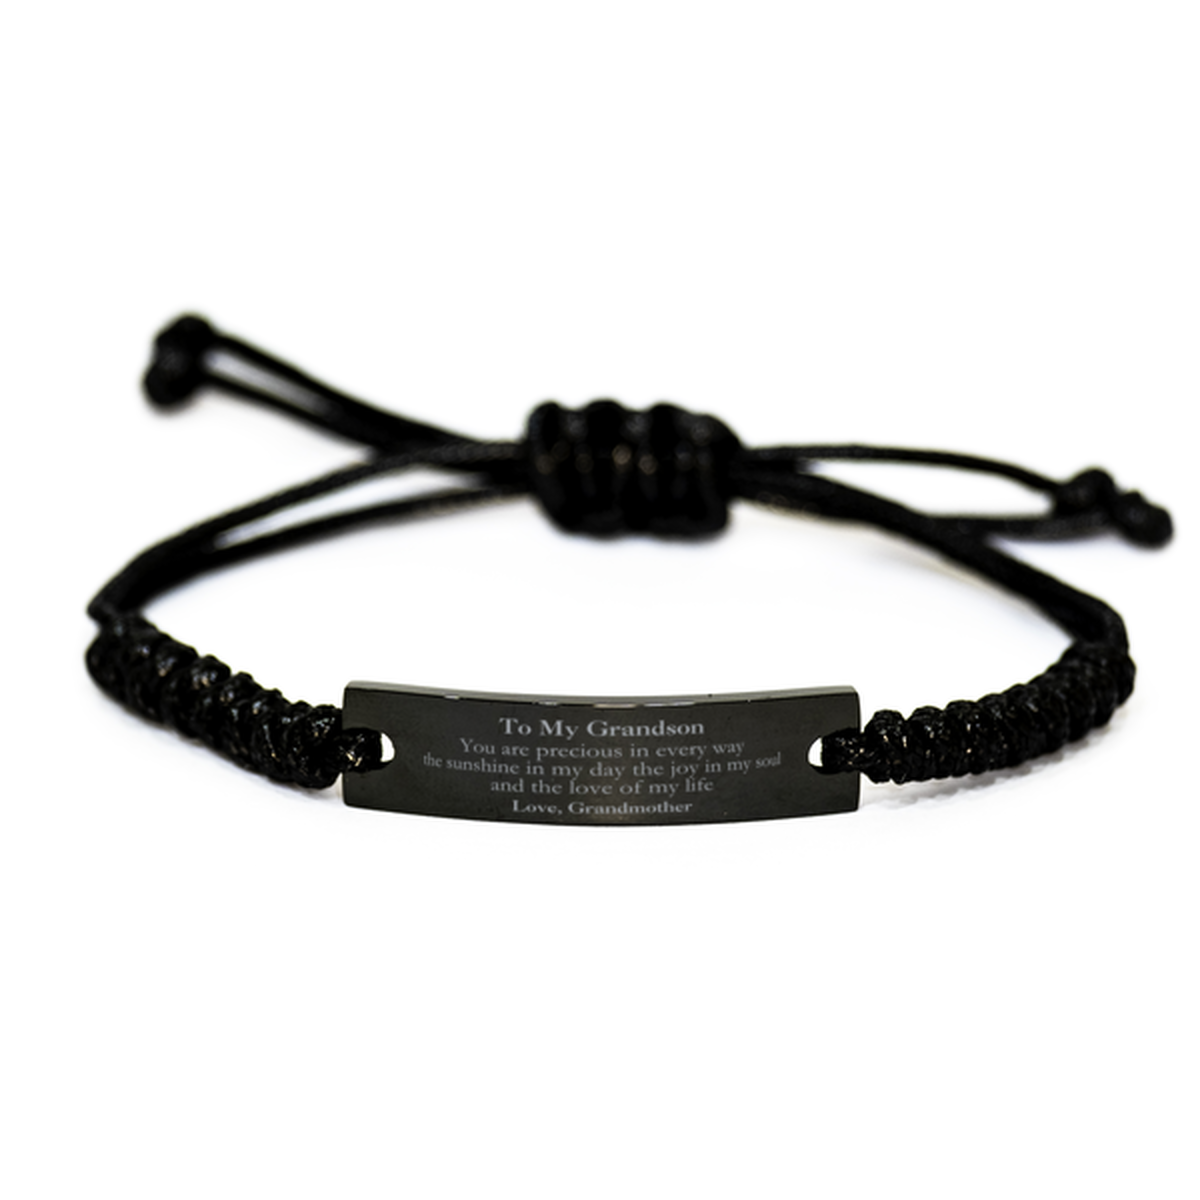 Graduation Gifts for Grandson Black Rope Bracelet Present from Grandmother, Christmas Grandson Birthday Gifts Grandson You are precious in every way the sunshine in my day. Love, Grandmother